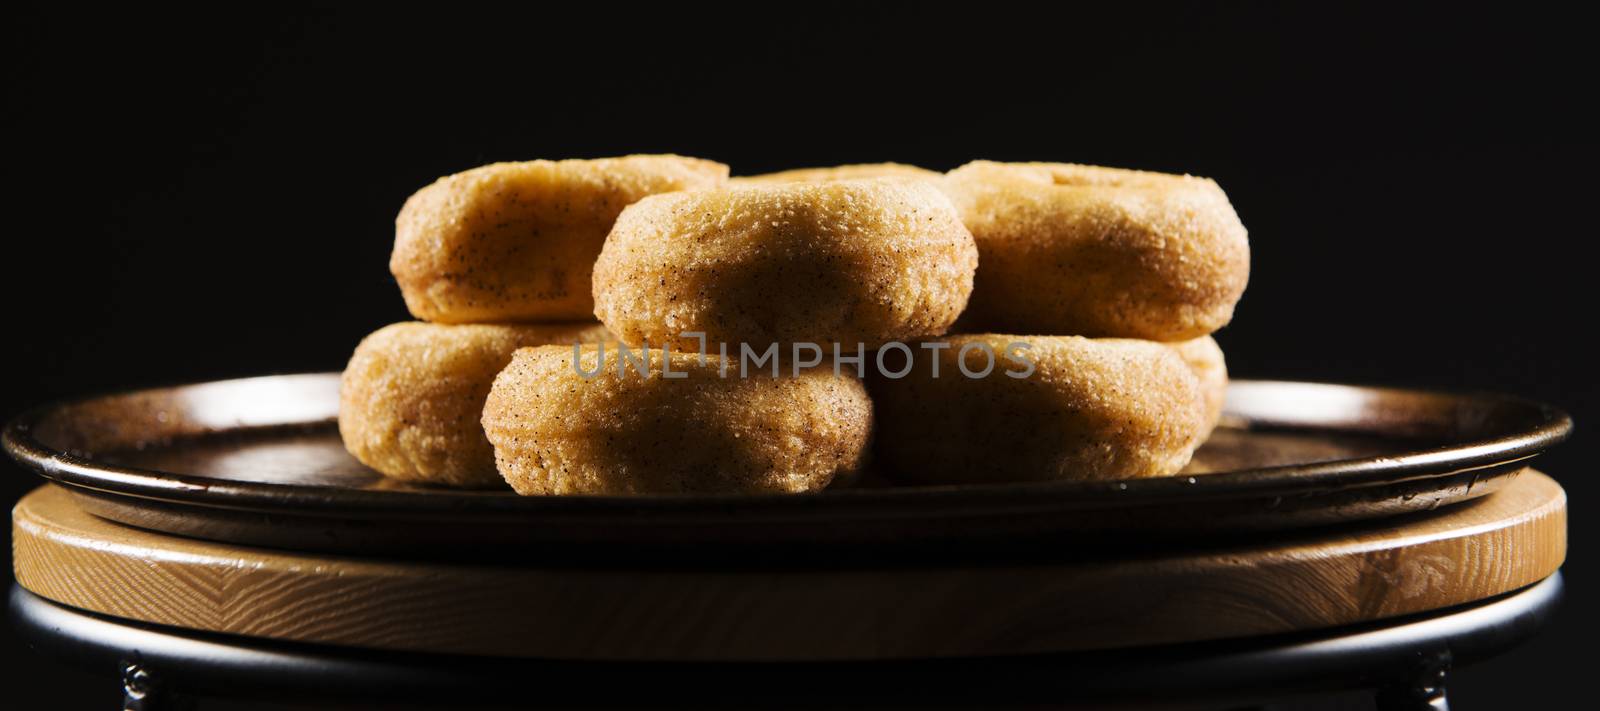 Fresh baked cinnamon donuts on a rustic metal baking tray.